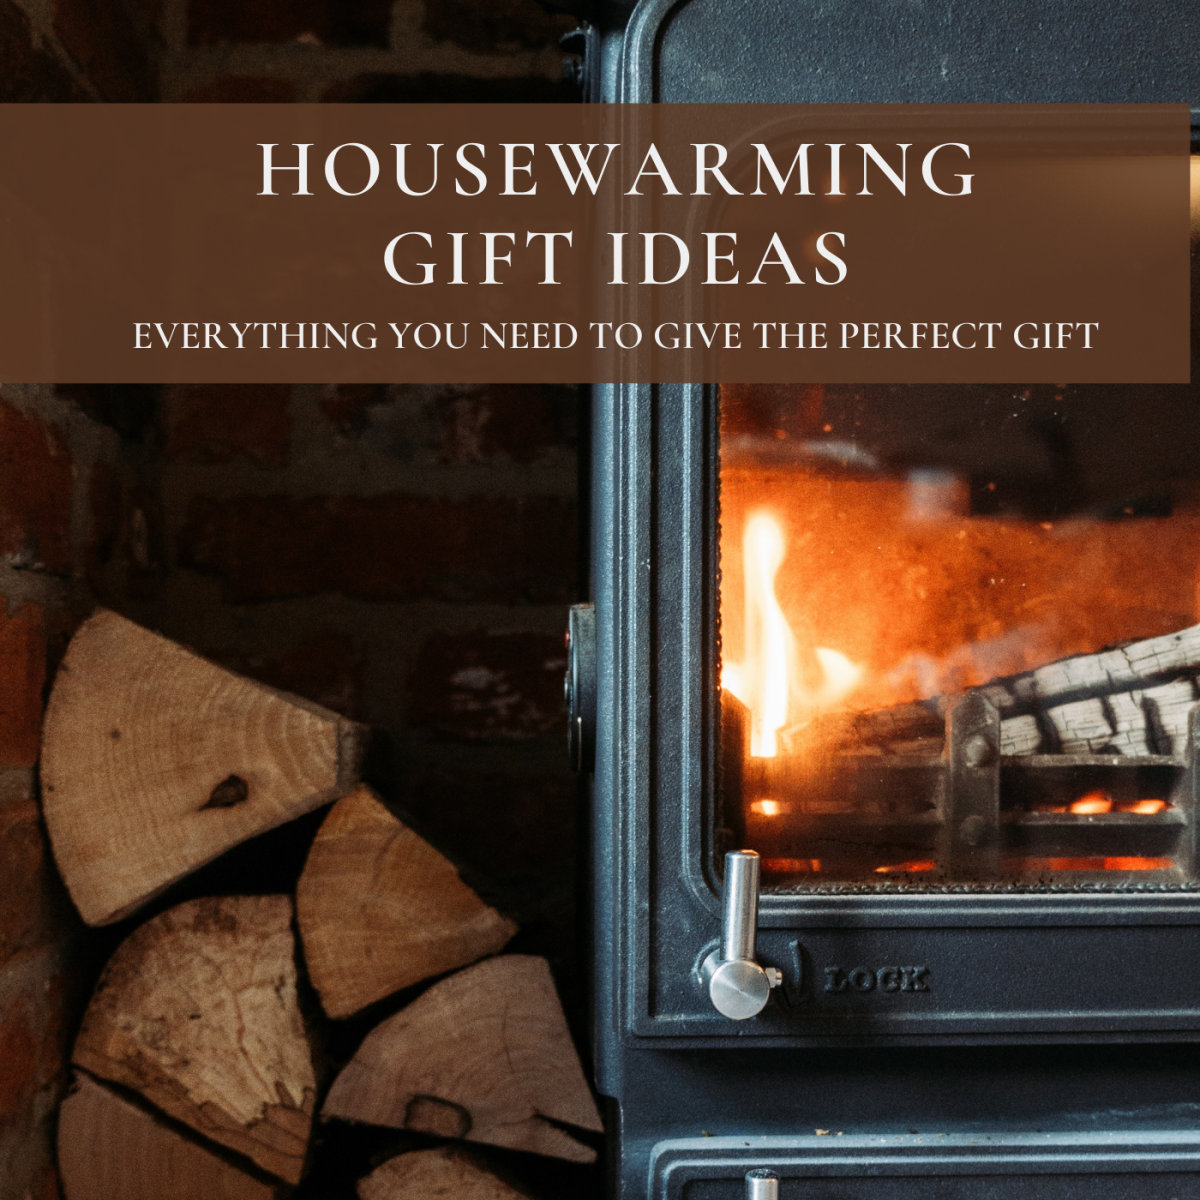 Wood is a traditional housewarming gift, but there are plenty of other great options.